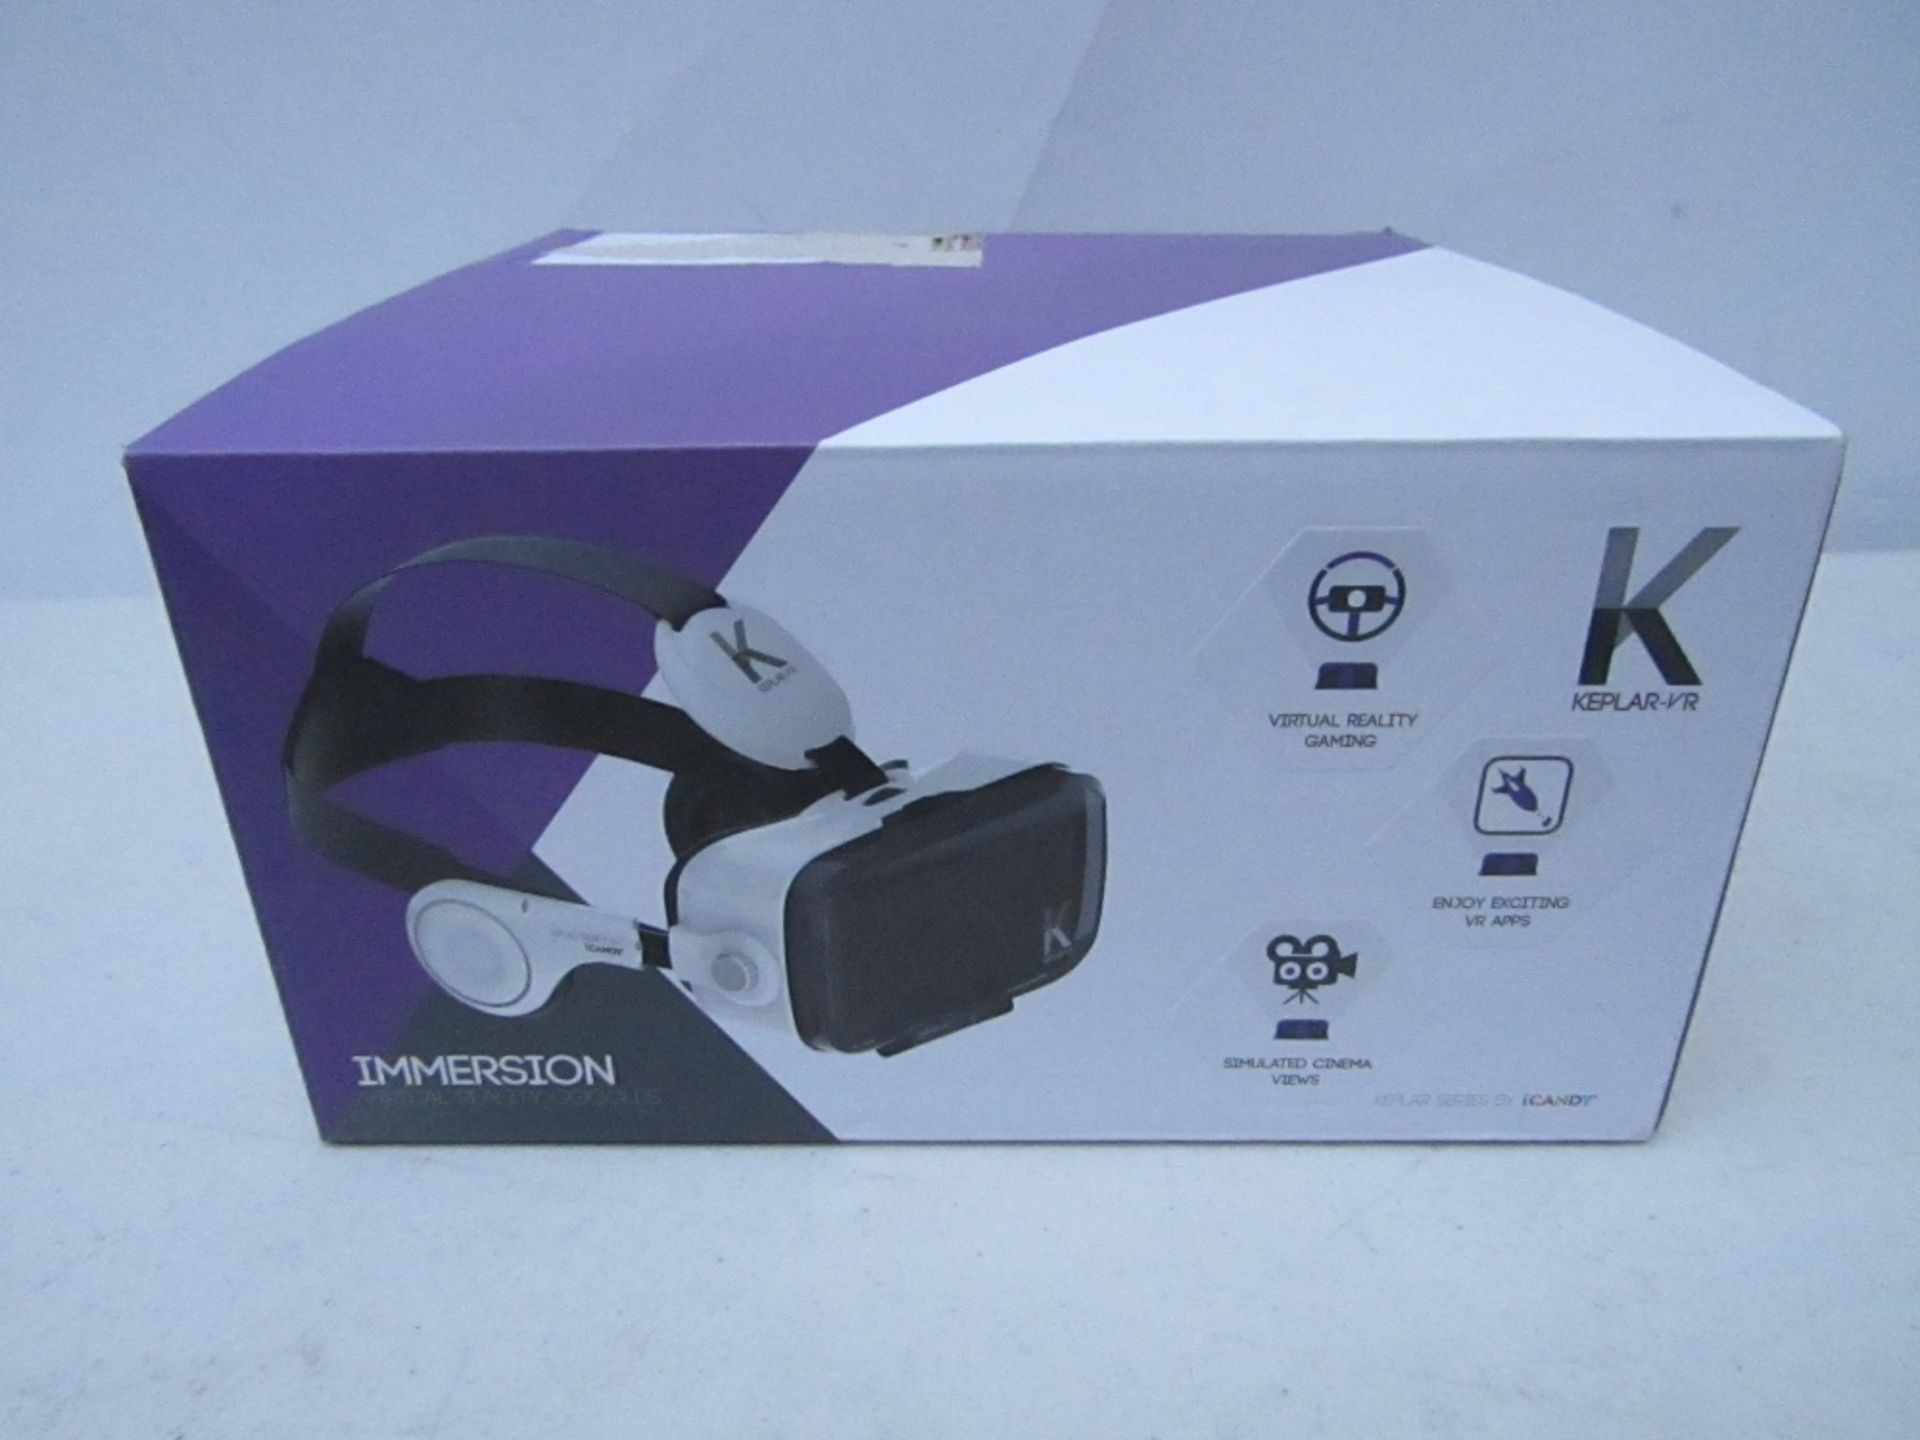 Keplar-VR Immersion virtual reality goggles. Unchecked & boxed.